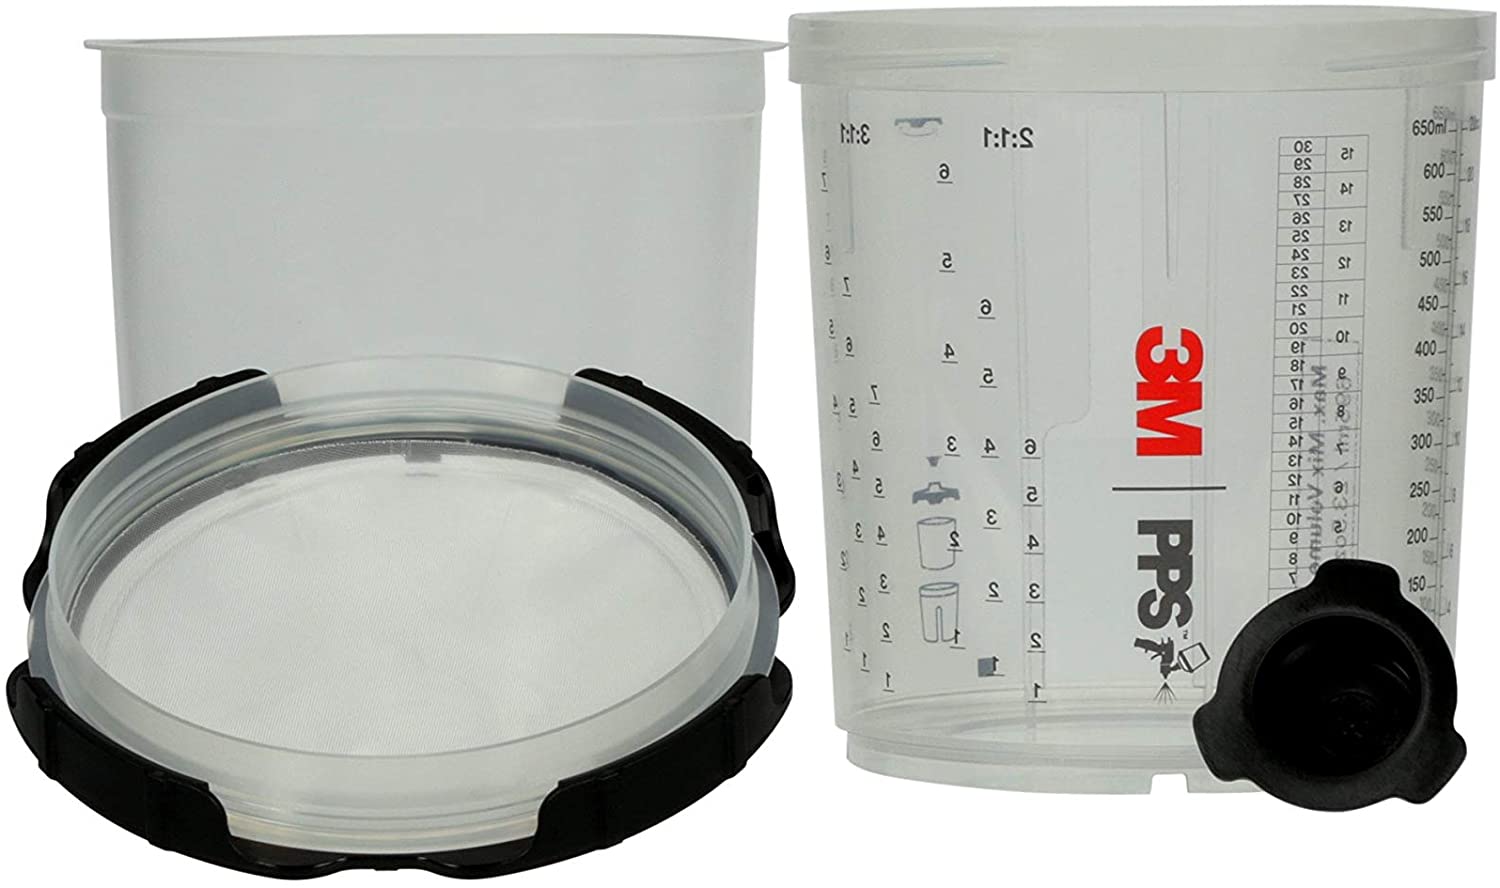 3M 16028 - PPS Lids & Liners, 3 oz Size, Full Diameter 200 Micron